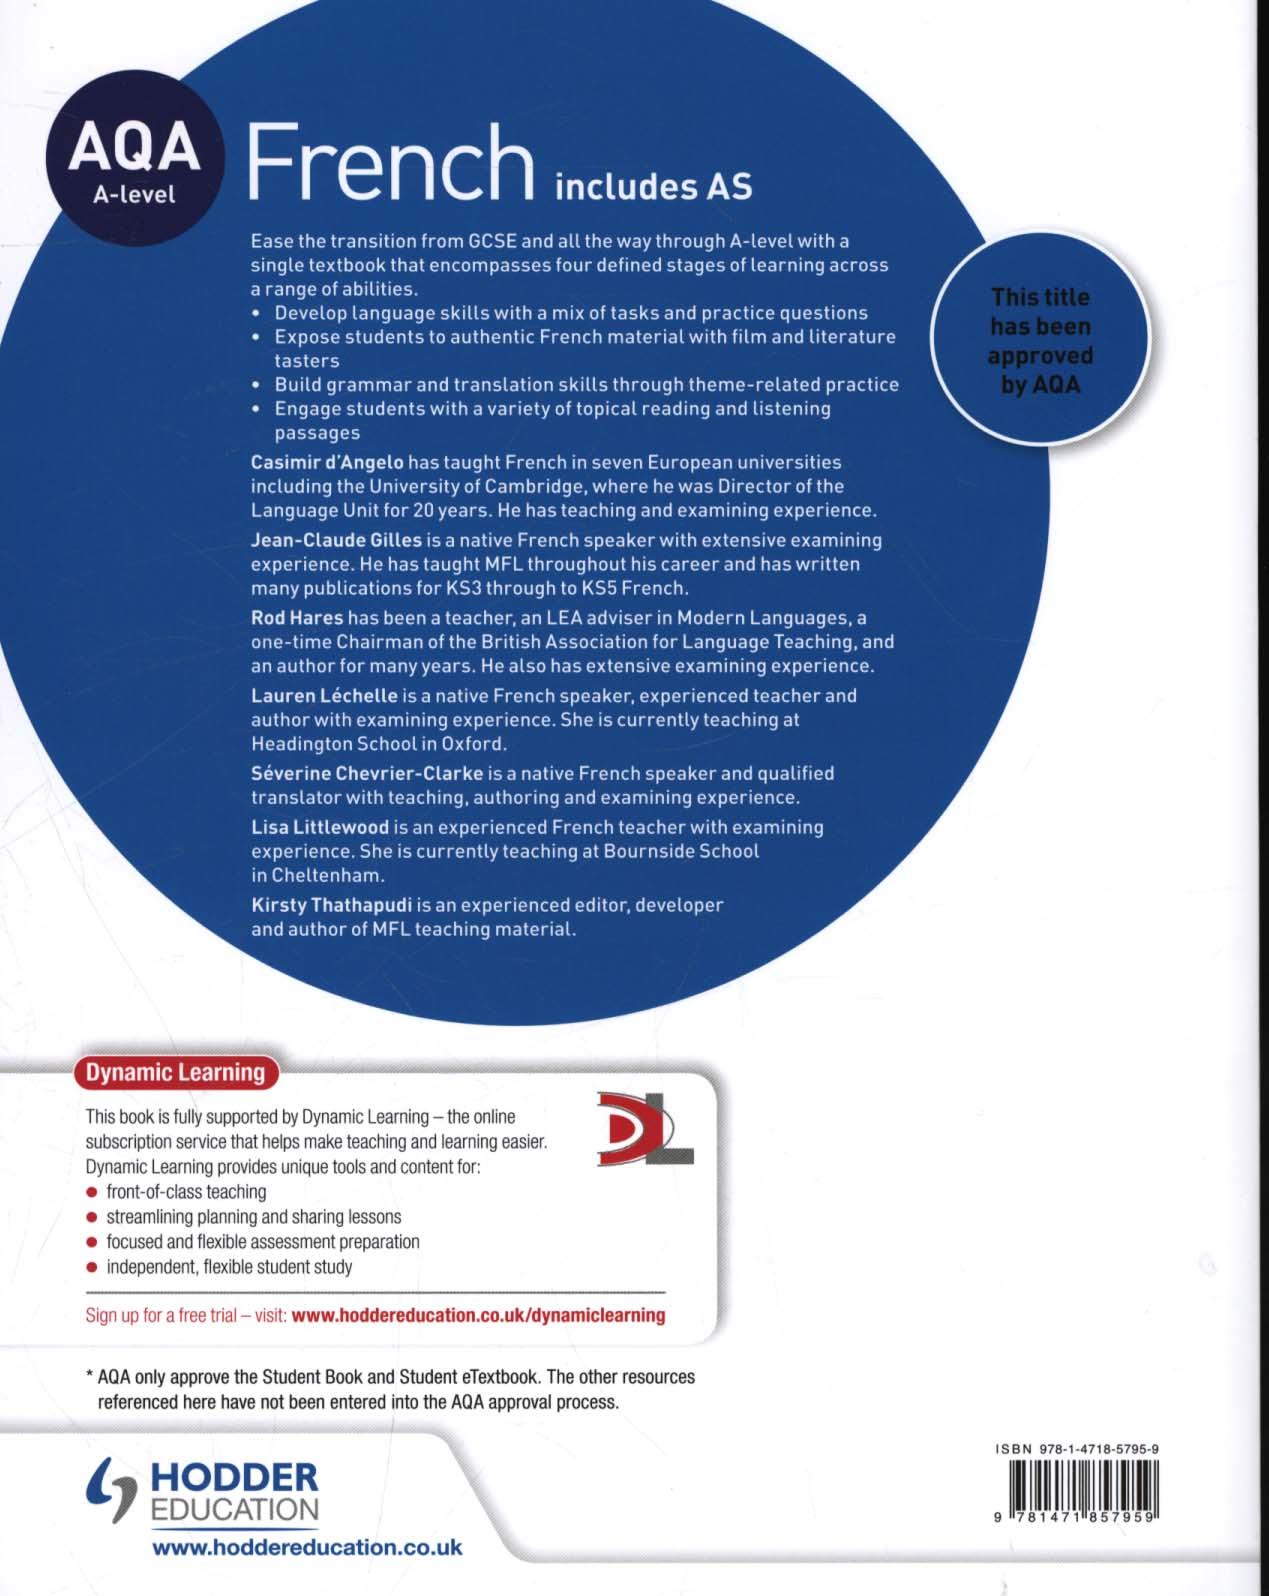 AQA A-Level French (Includes AS)